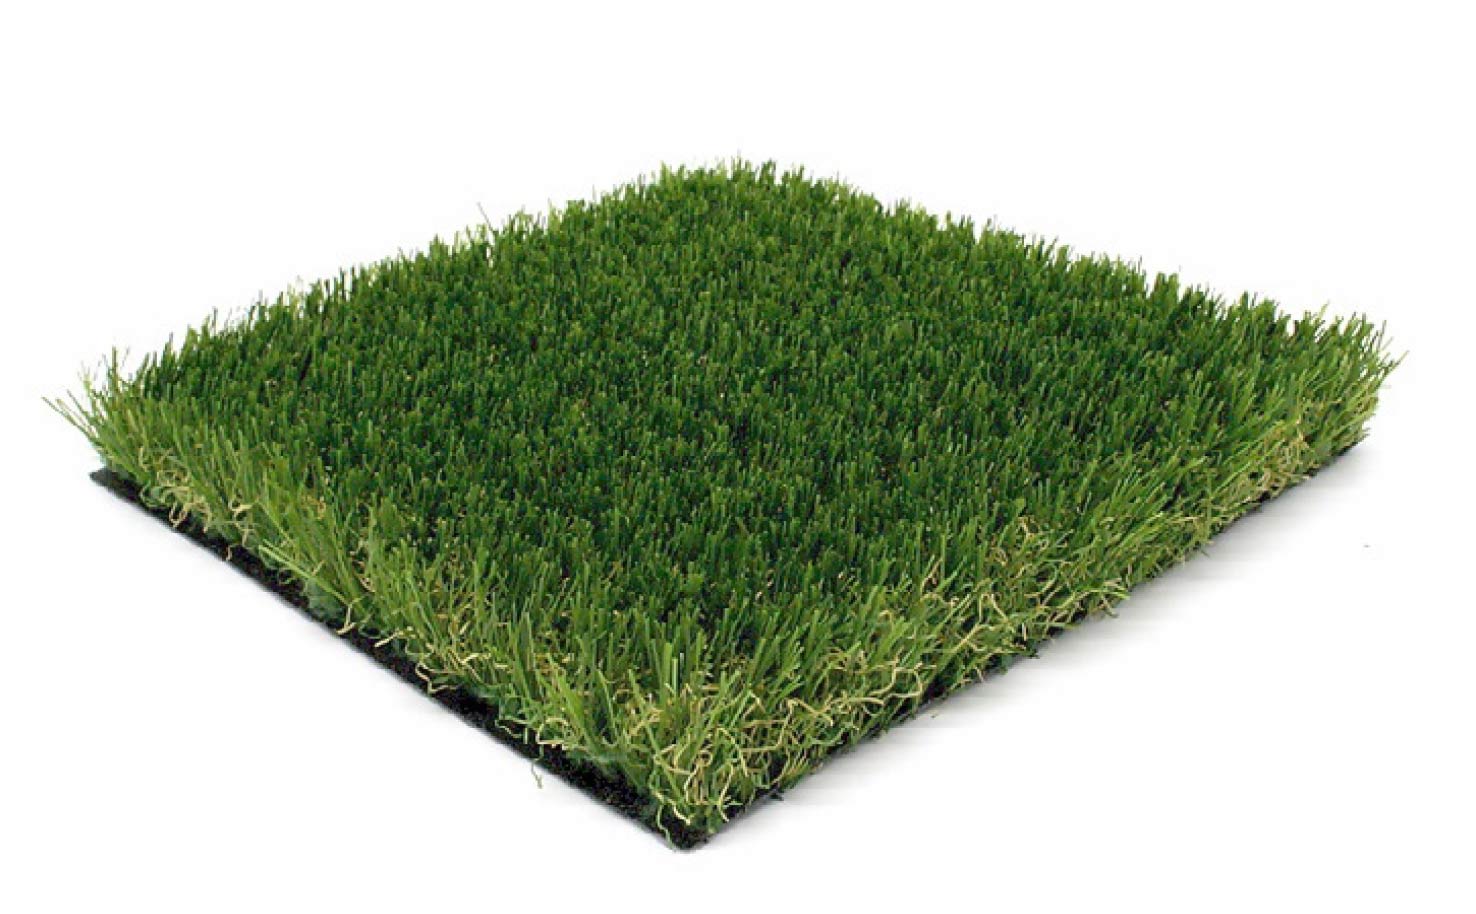 New Lawn Supersoft sample